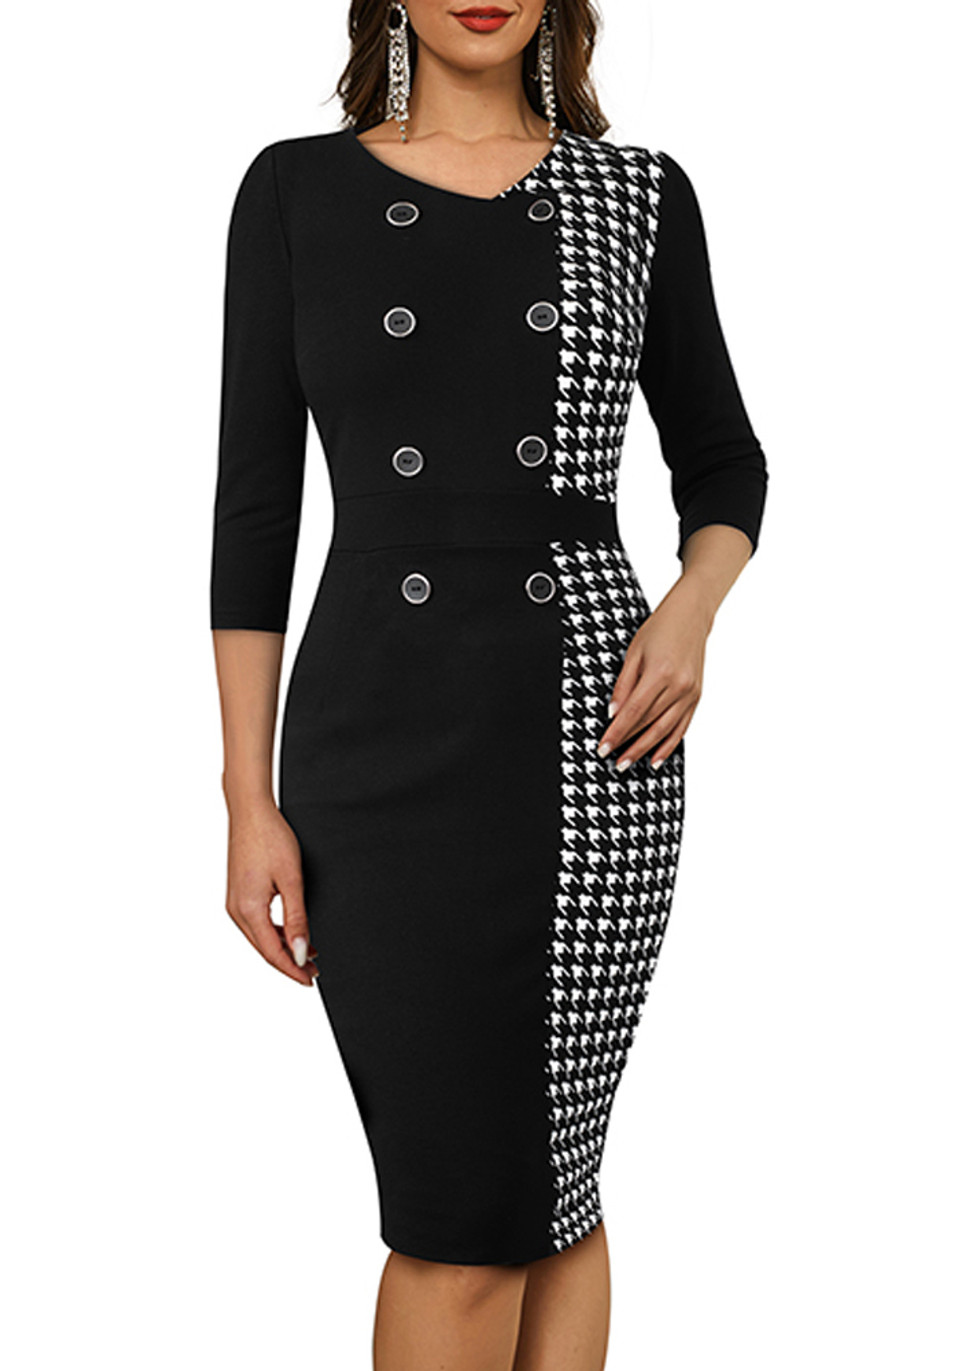 Women Patchwork Button Houndstooth Career Dress The Little Connection